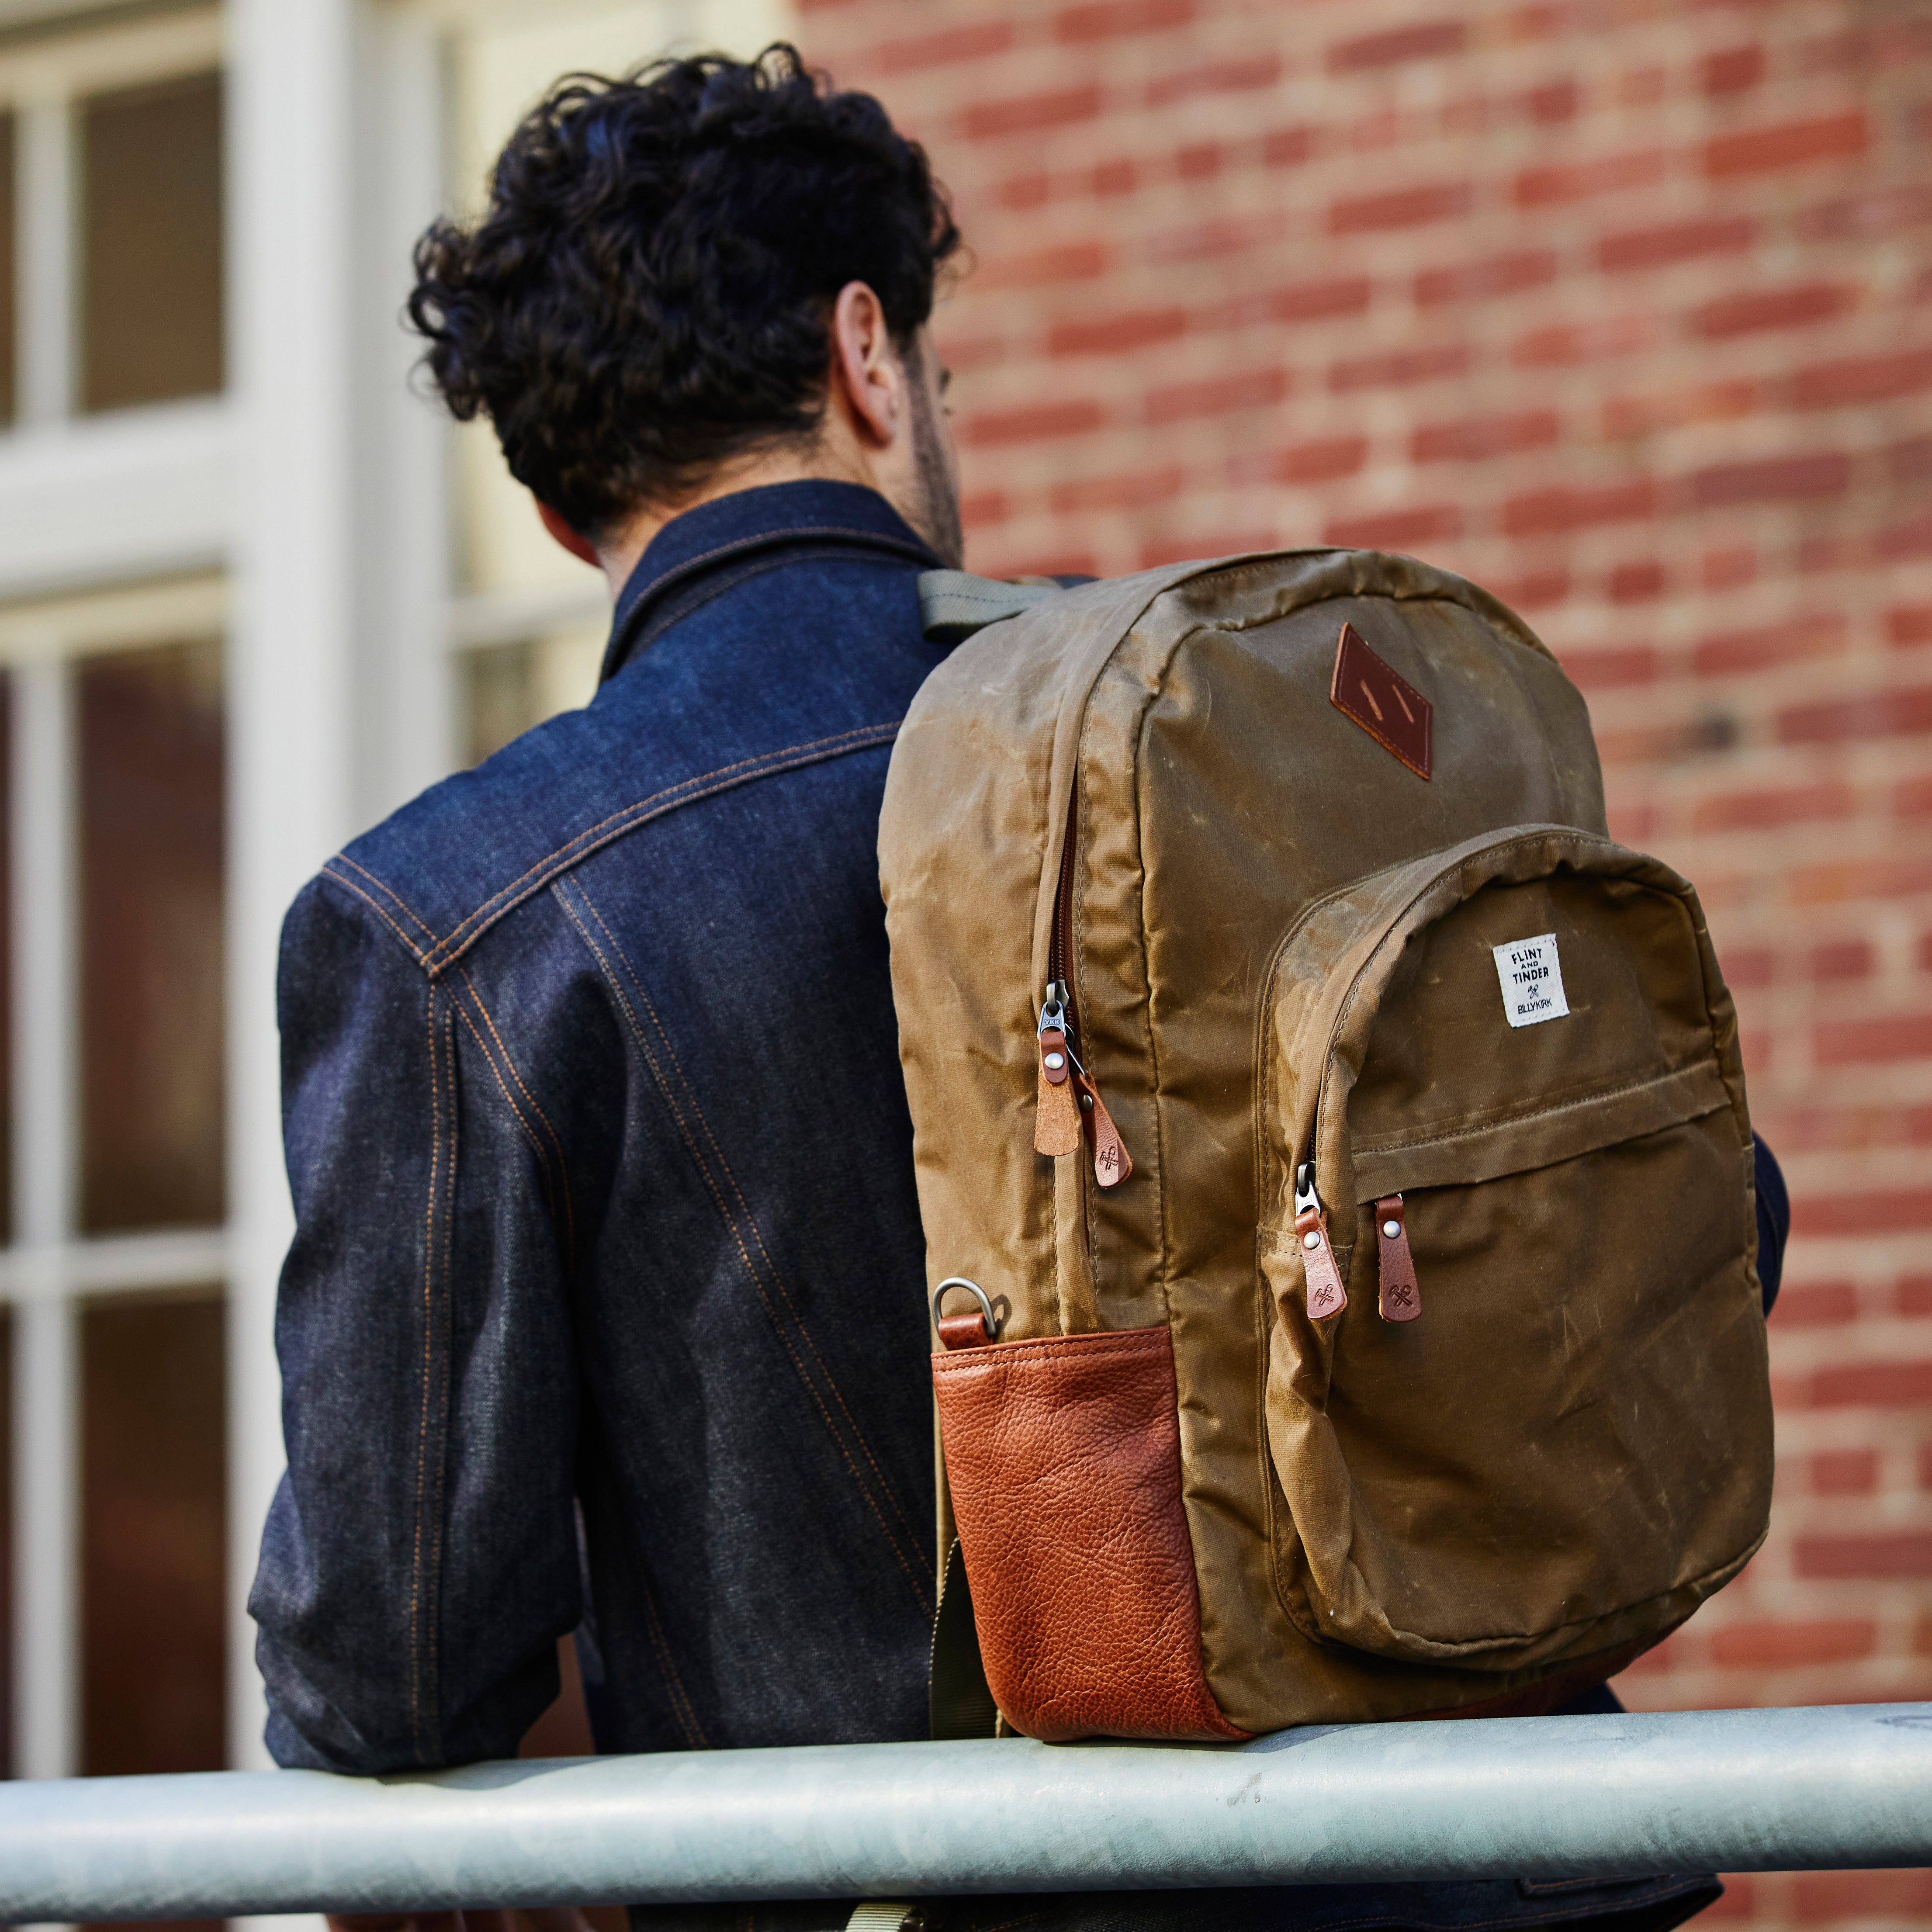 No. 297 Standard Issue Backpack